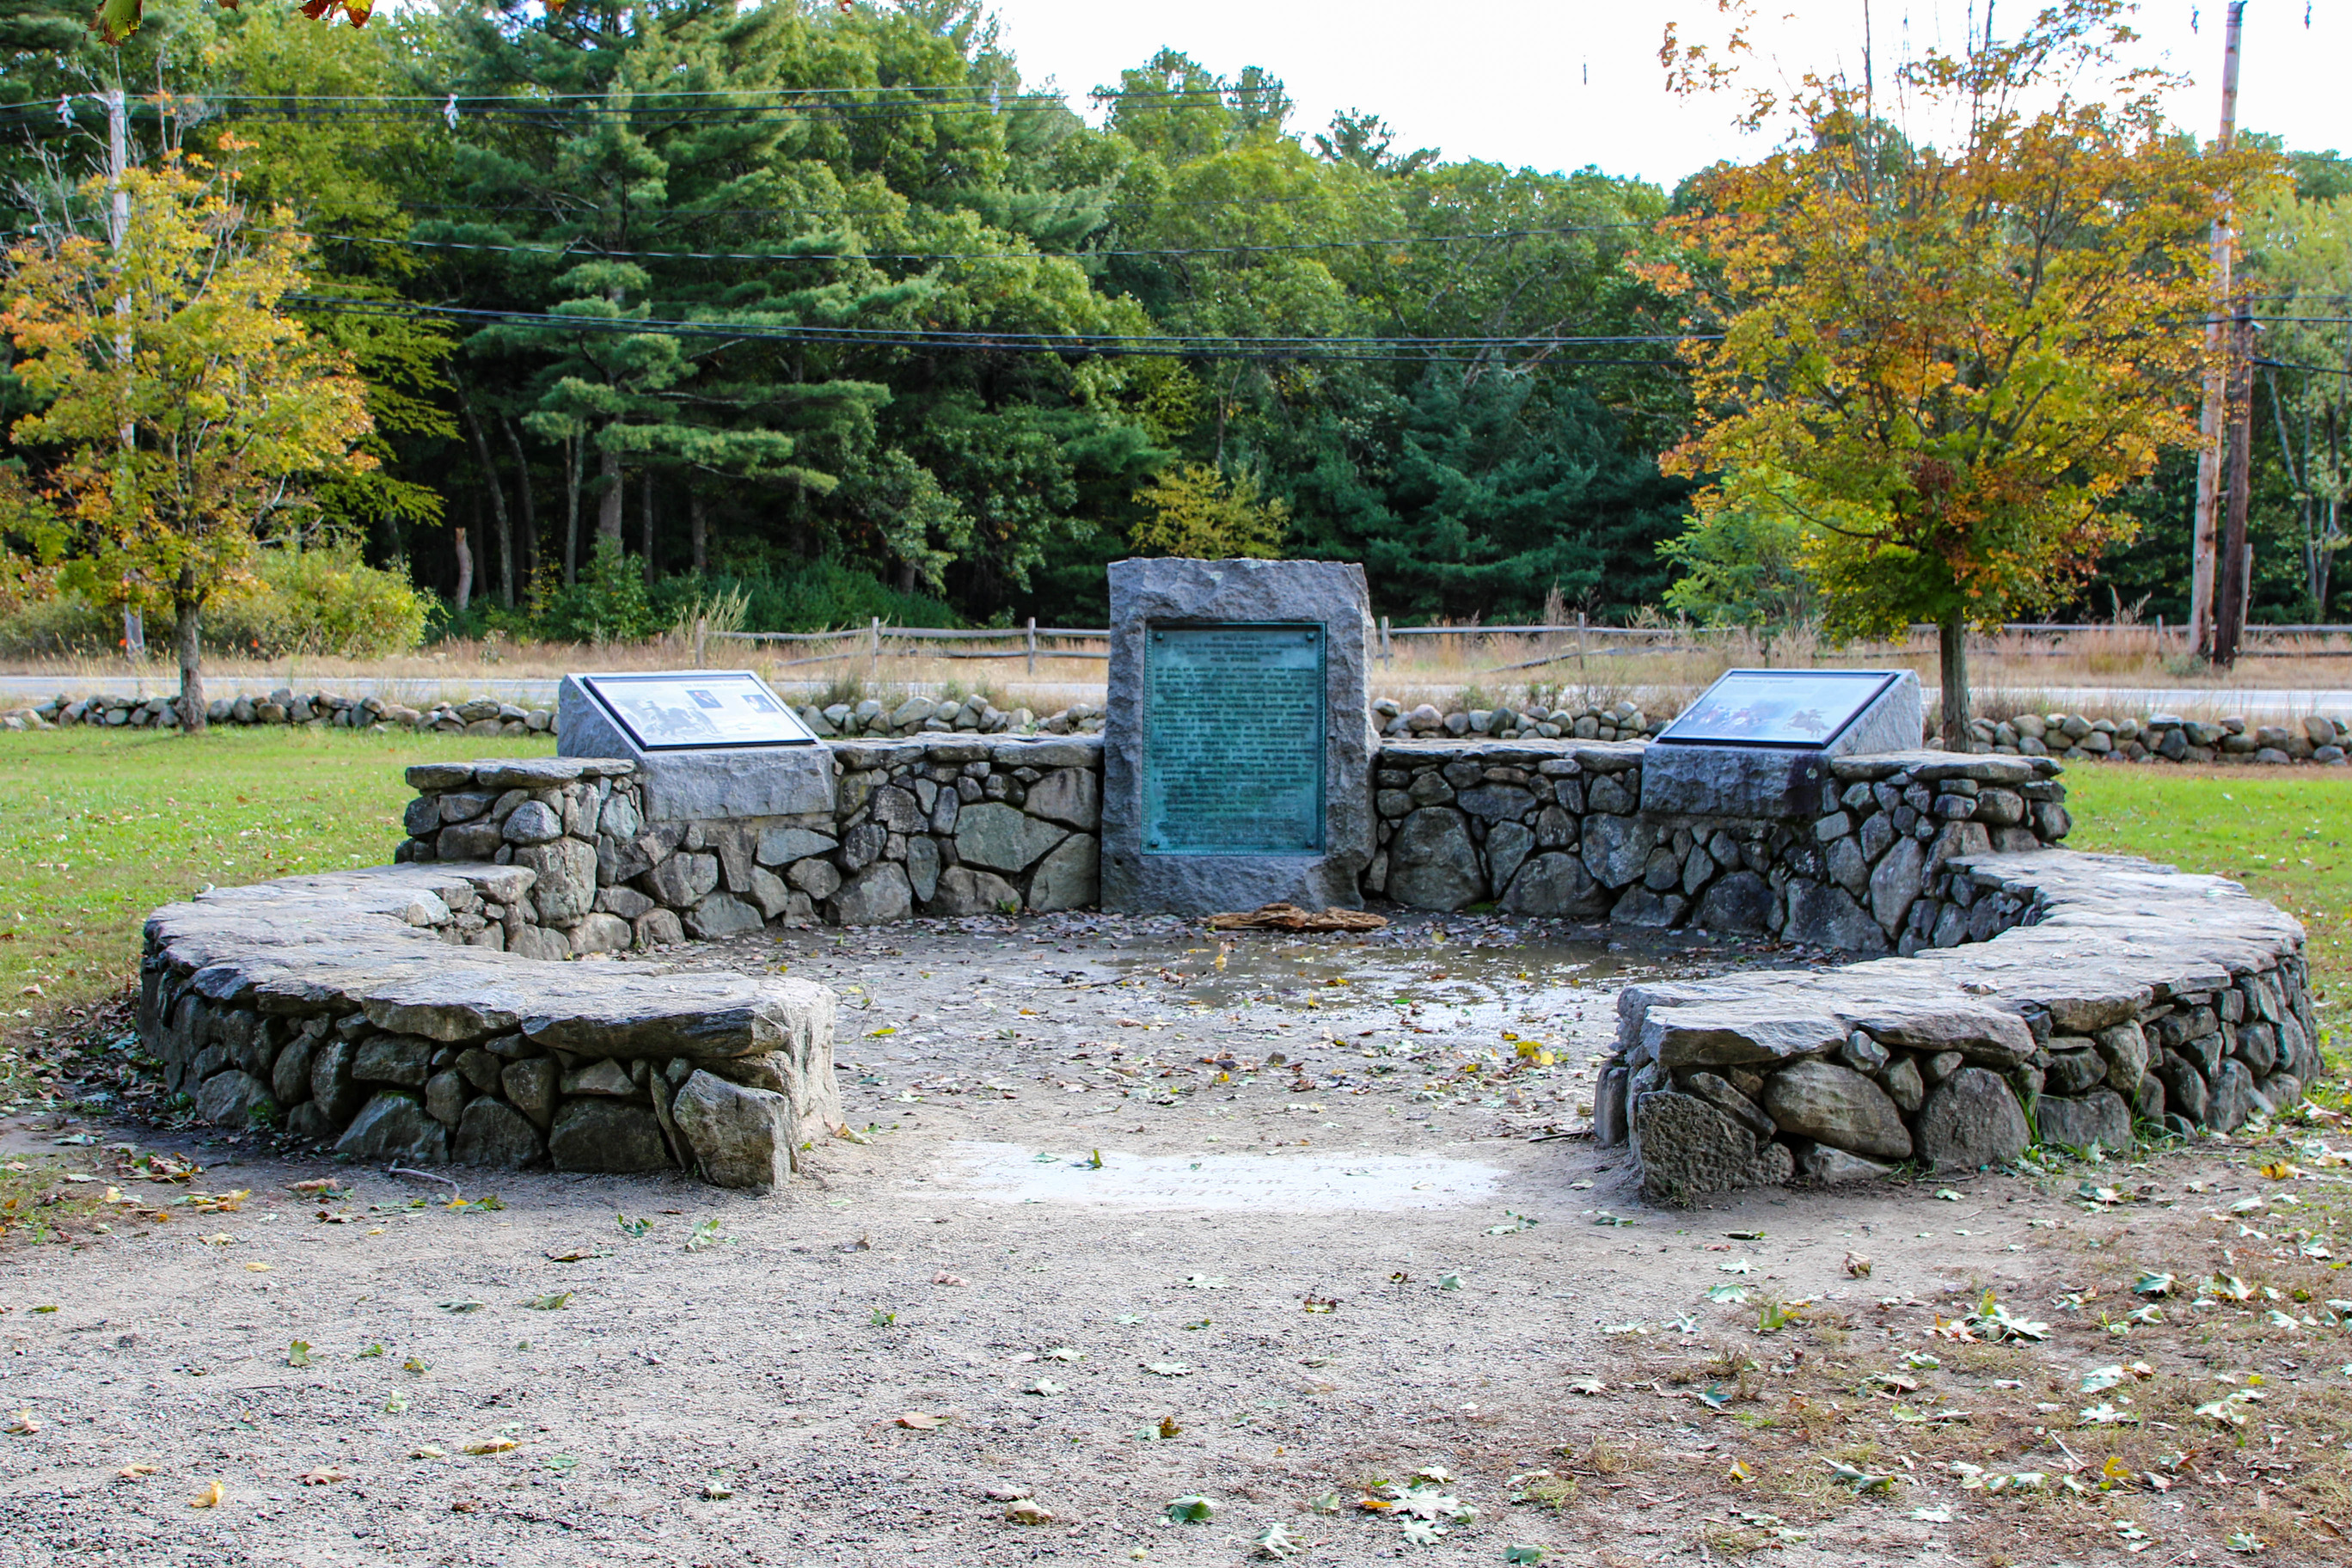 Circular stone memorial with a plaque and interpretive signs